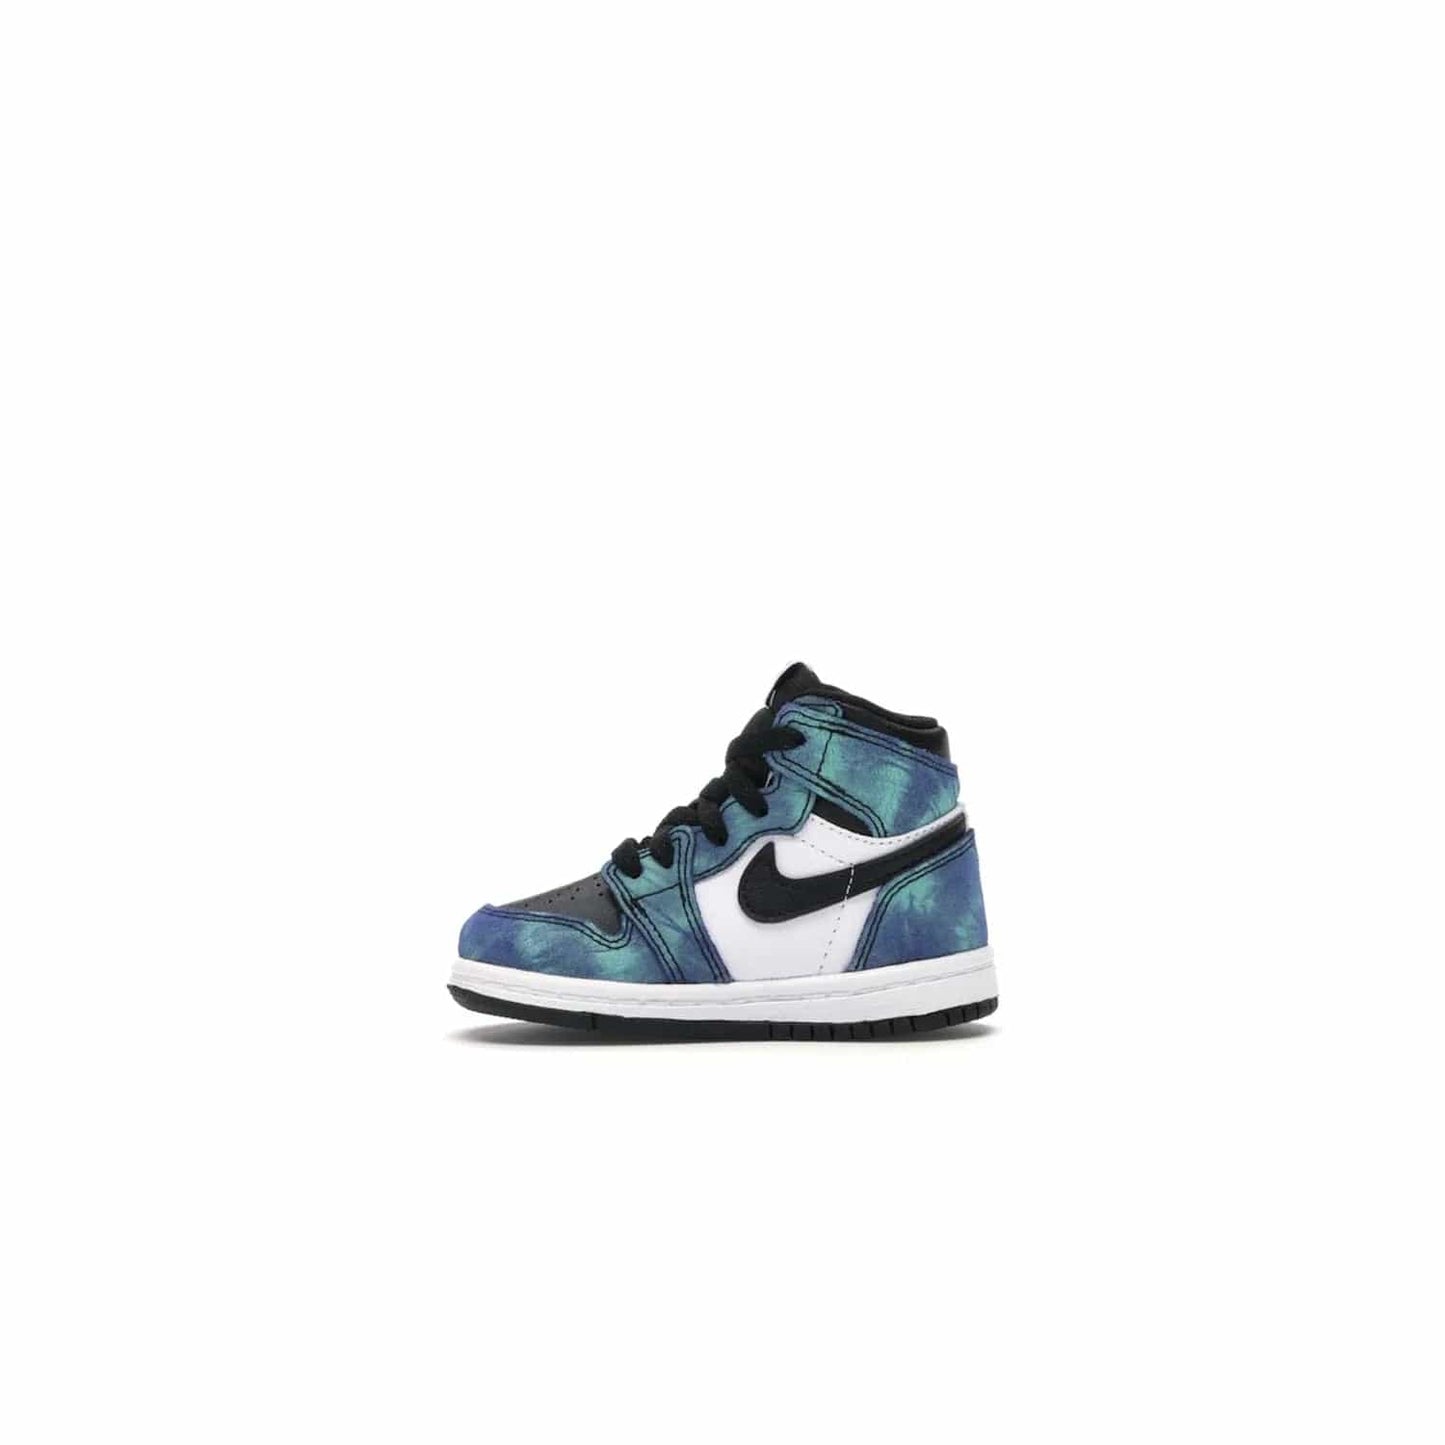 Jordan 1 Retro High Tie Dye (TD) - Image 19 - Only at www.BallersClubKickz.com - Add a unique twist to your sneaker collection with the Jordan 1 Retro High Tie Dye (TD). Classic Air Jordan 1 details like toe box perforations and the signature Swoosh logo on the sidewall are topped with an eye-catching tie dye design that’s perfect for styling all year round.